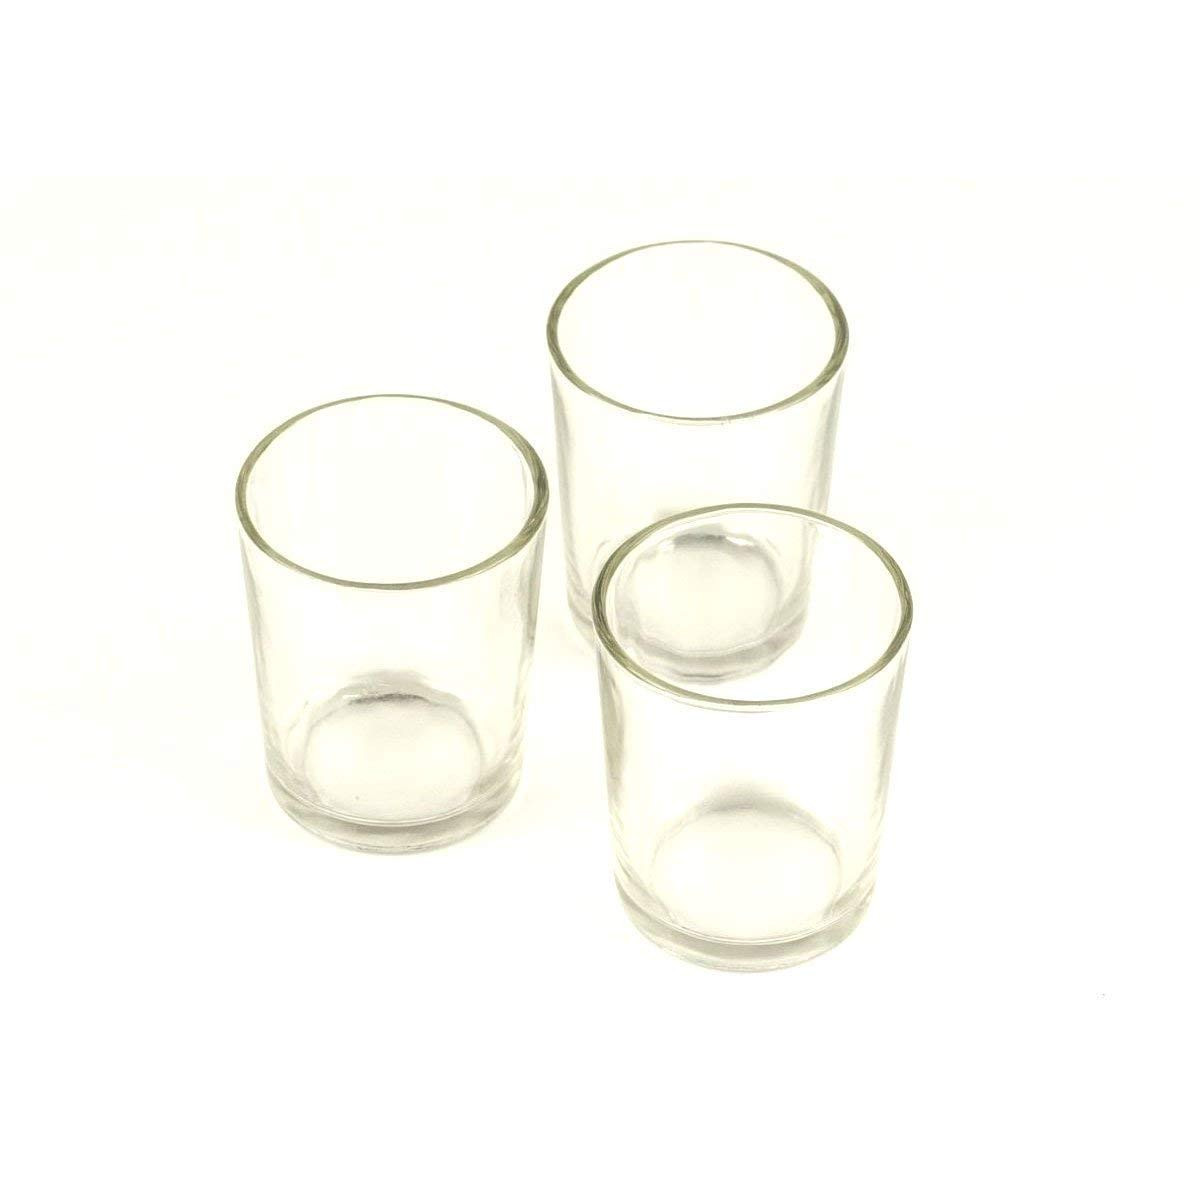 20 inch cylinder vases of amazon com clear glass votive holders 2 5 pack of 12 home kitchen regarding 51peo9vaadl sl1200